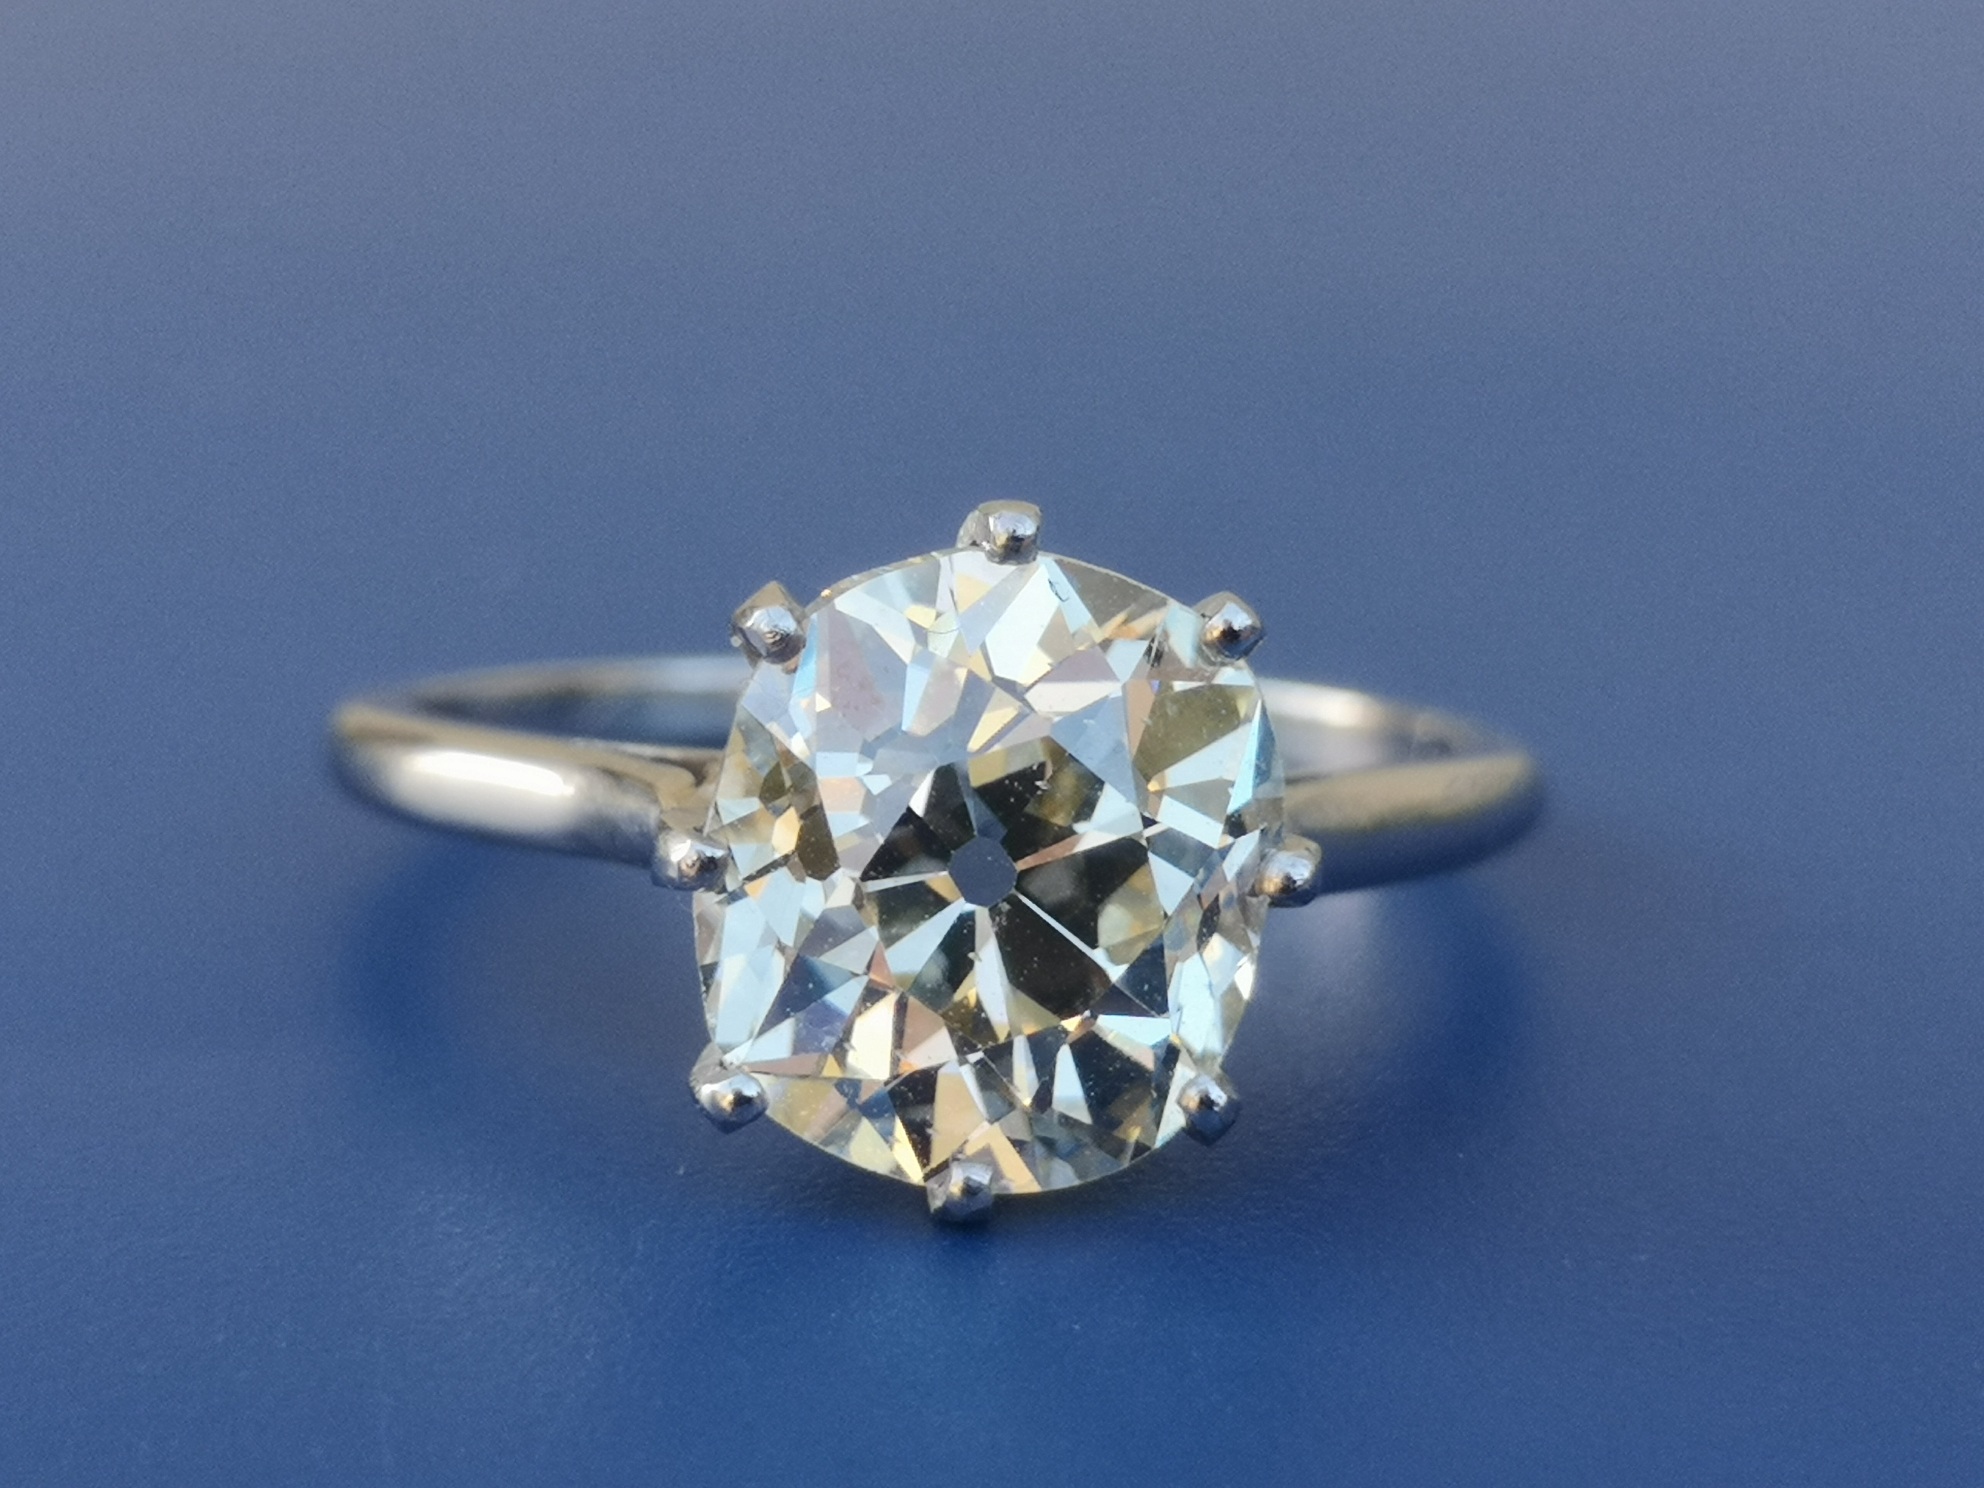 A certified 3.75 carat light yellow diamond solitaire for £7,500.